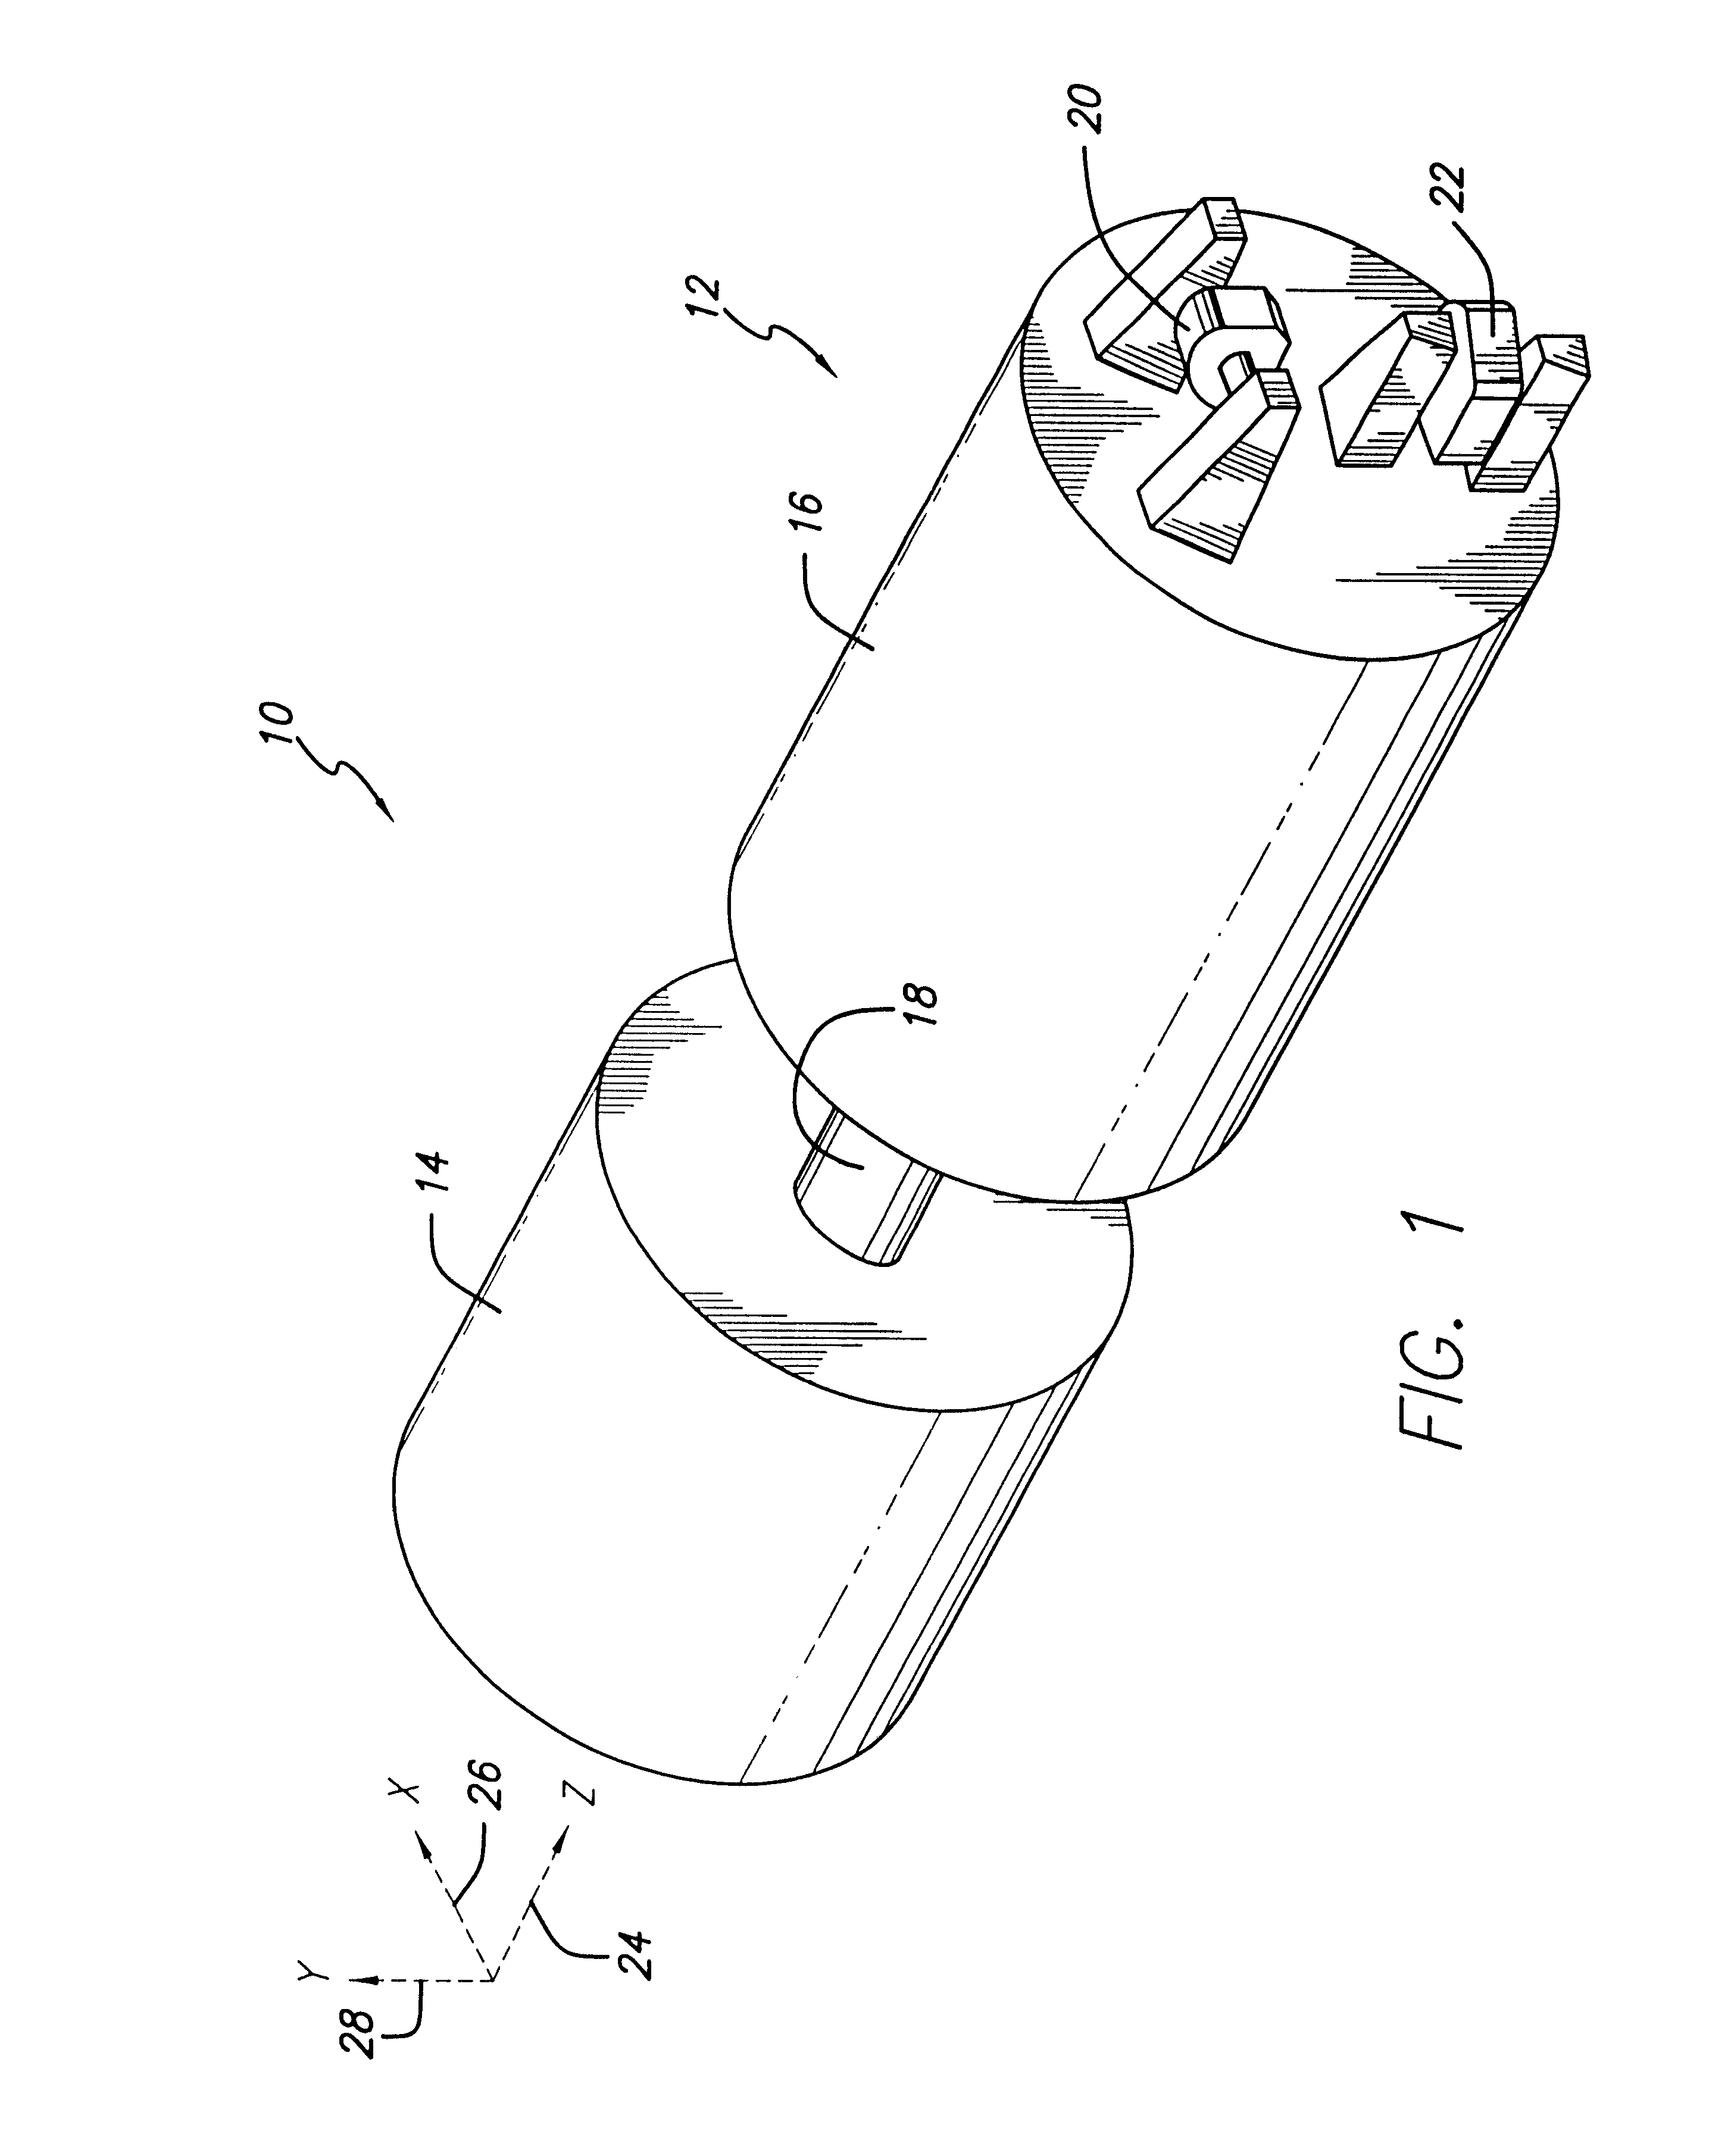 System and method for controlling the attitude of a space craft